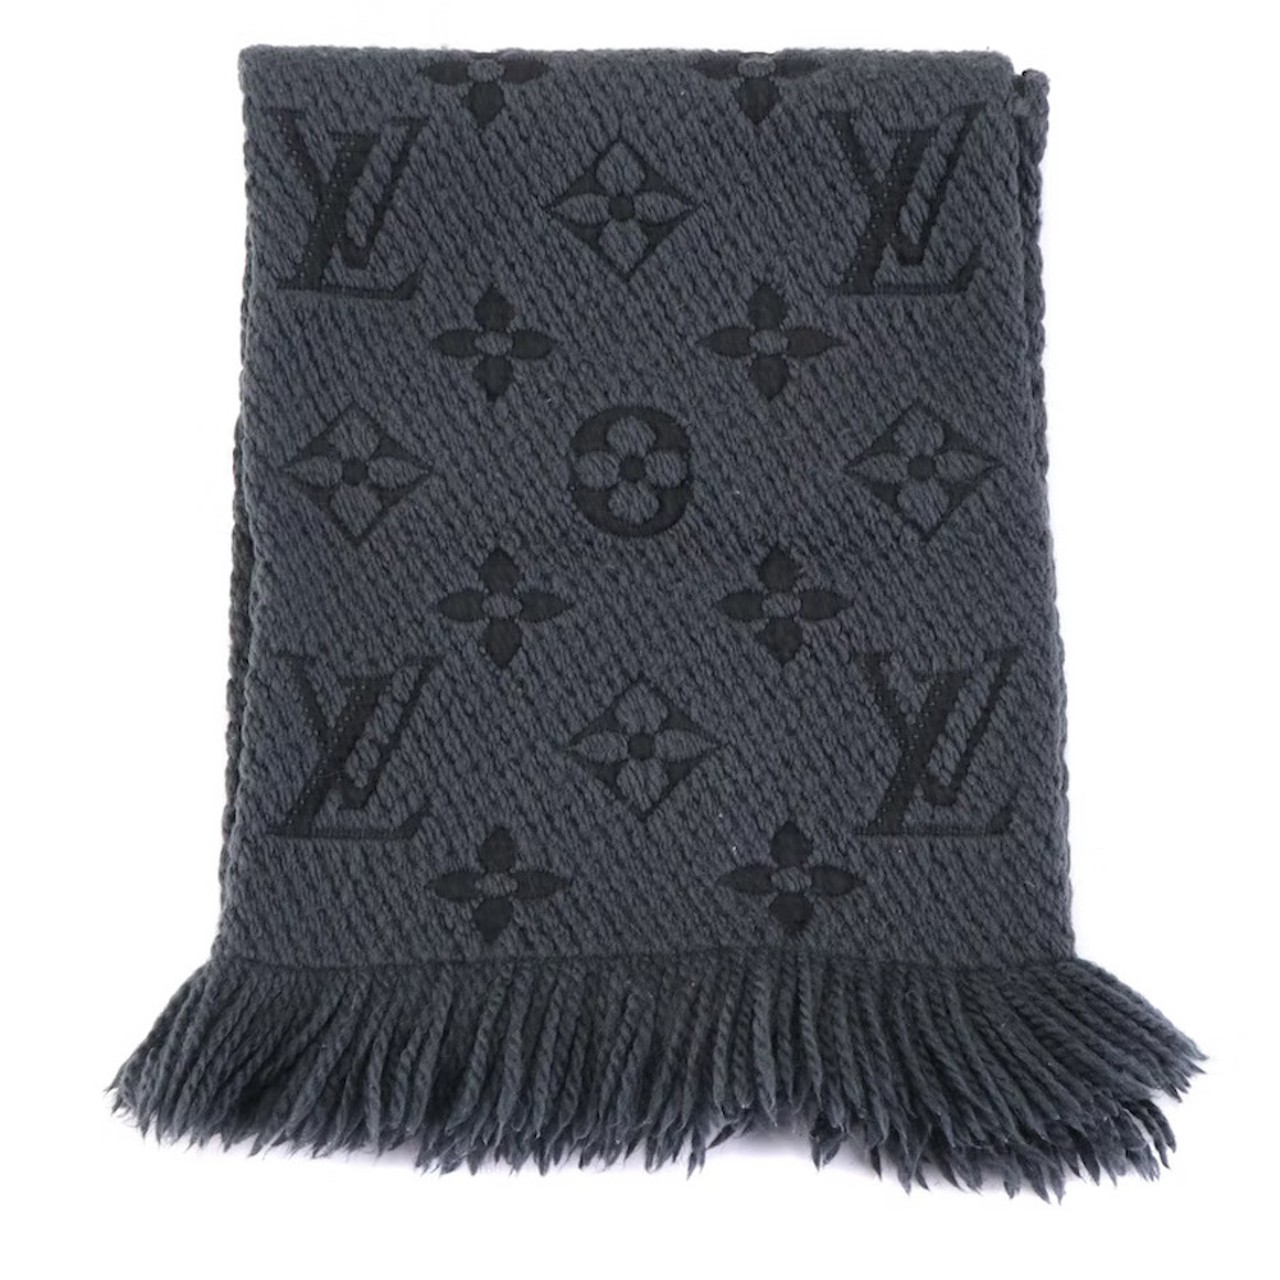 Louis Vuitton Logomania Scarf in Grey and Black Knit Jacquard
Jingle ball on a budget! This Louis Vuitton scarf is simple enough to go with any coat while still making a treat-yo-self statement. Lean into the secondhand-ness of the gift by wrapping it in newspaper, just be sure to include the EBTH receipt so they know it’s 100% authentic.